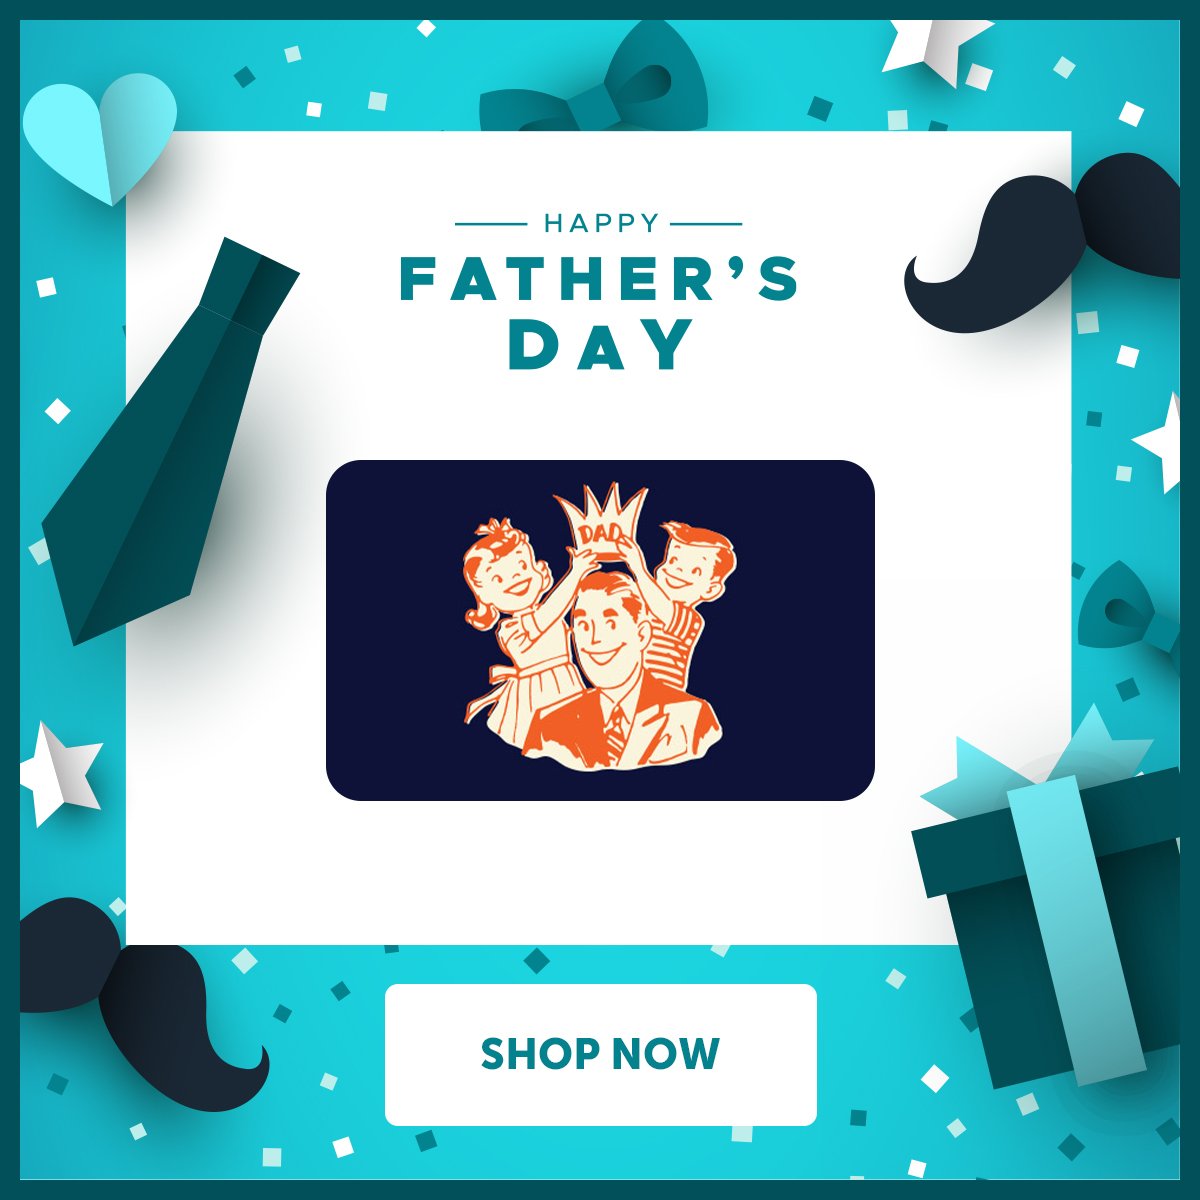 Happy Father's Day. Shop Now